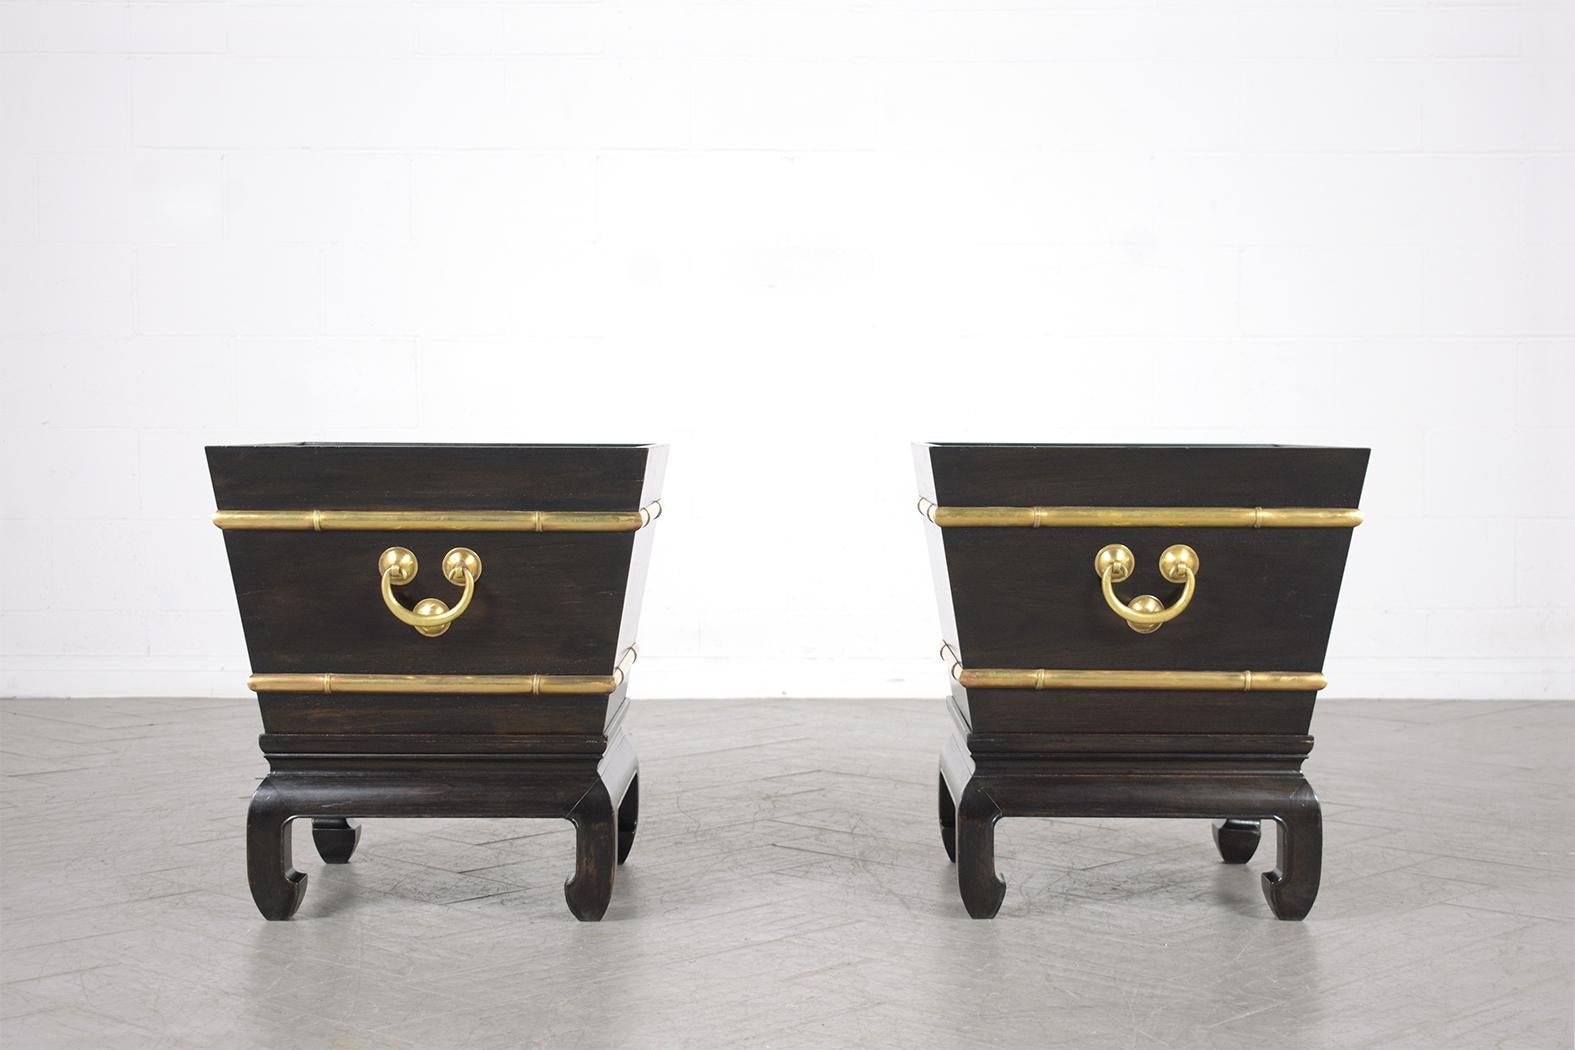 Experience the timeless allure of our pair of early 1900s Chinese garden planters, skillfully restored by our in-house team of professional craftsmen. Crafted from wood and brass, these vintage planters showcase an elegant ebonized color, finished